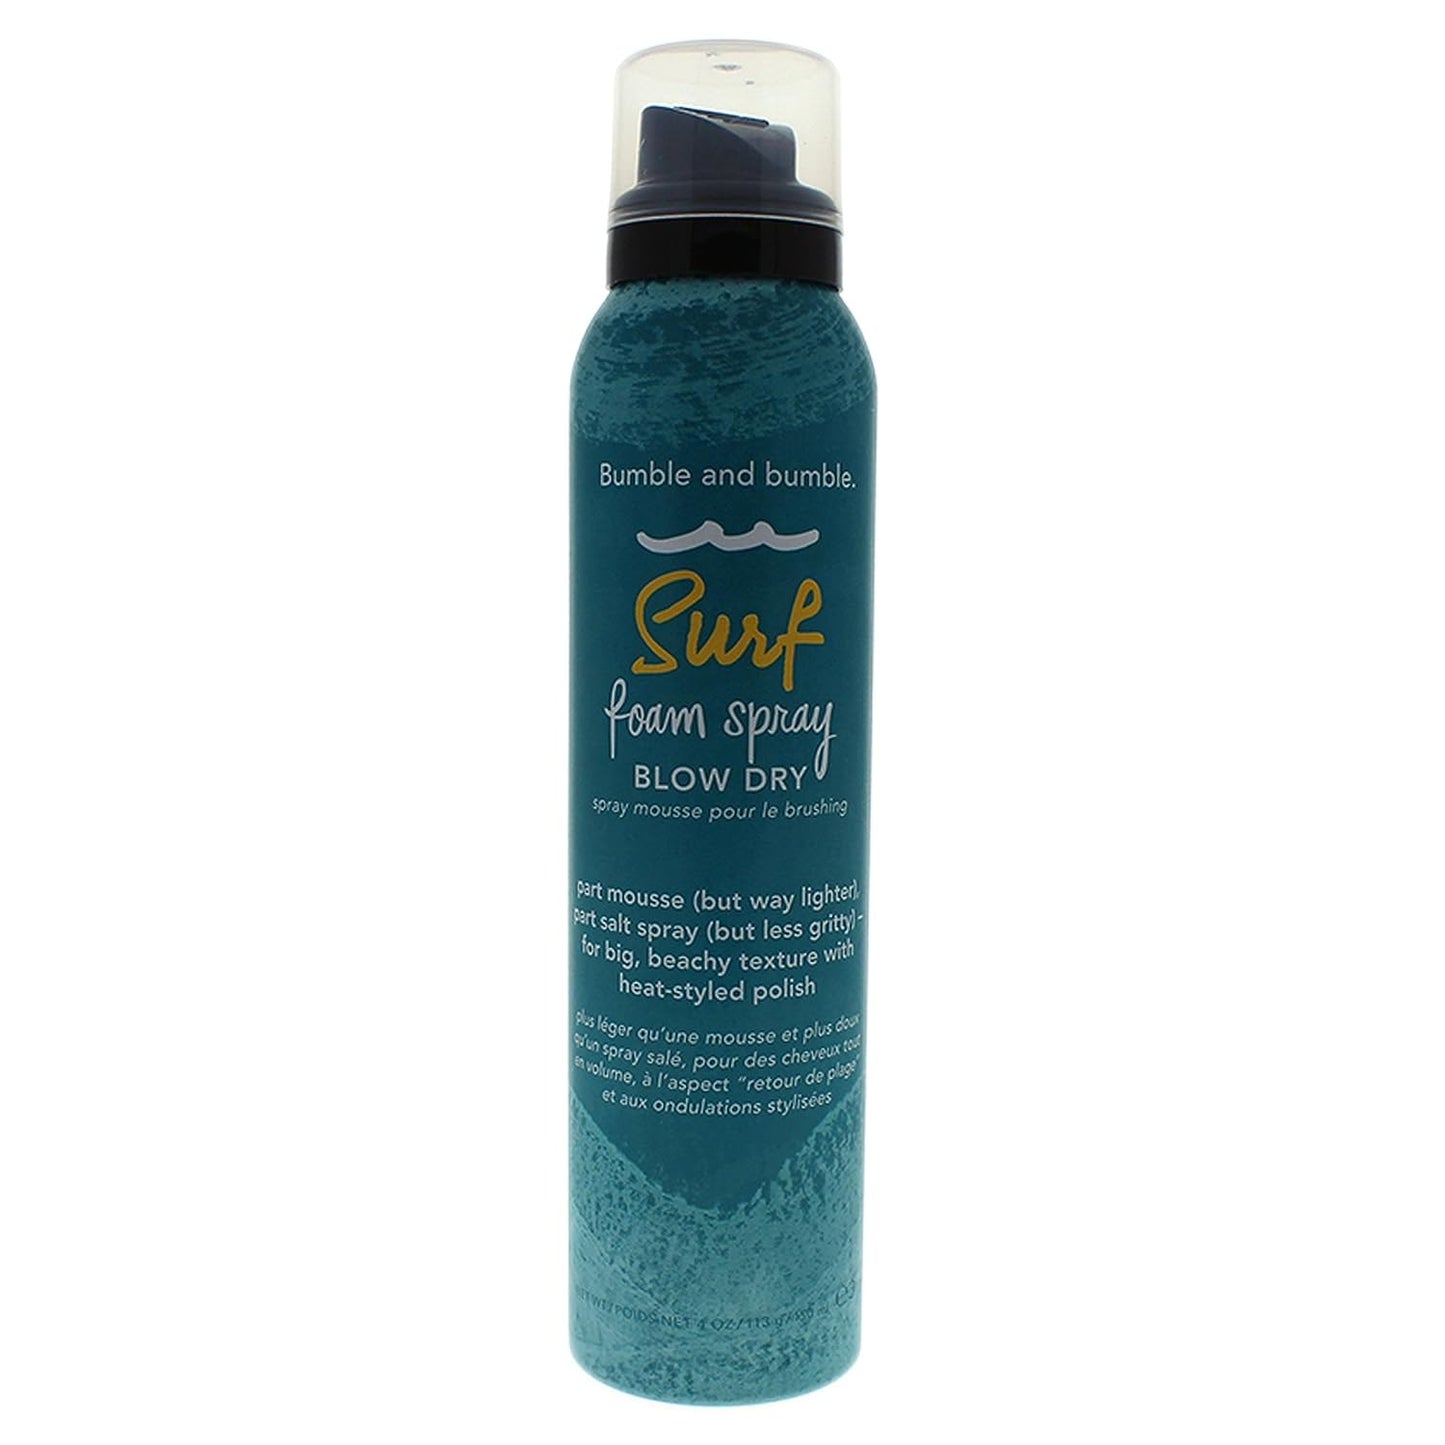 Bumble and Bumble Foam Spray Blow Dry for Unisex, Green, Surf, 4 Ounce